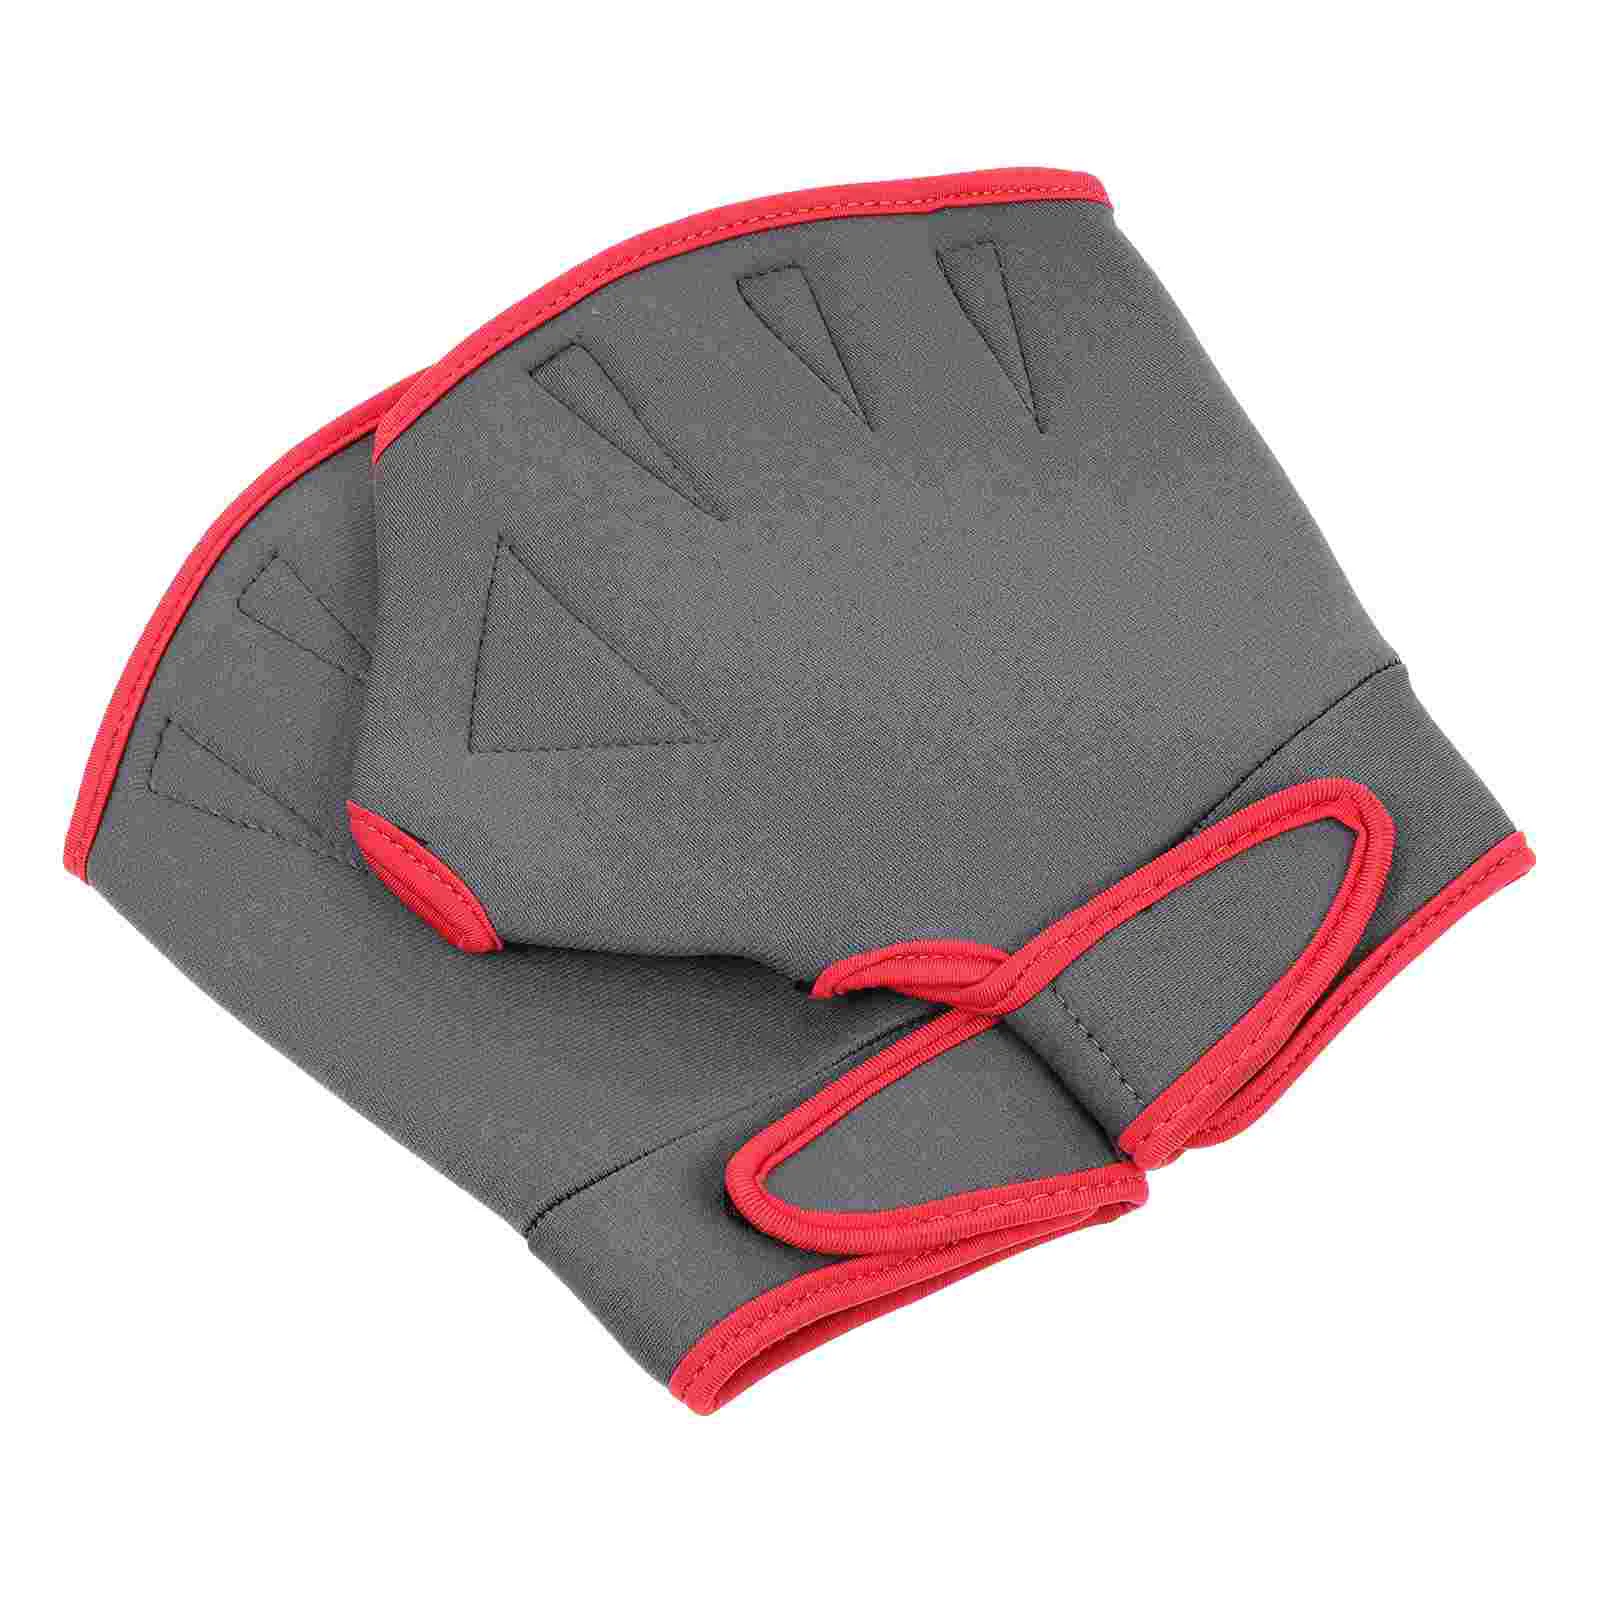 

Gloves Swimming Webbed Swim Water Hand Training Resistance Aquatic Paddles Mitten Accessory Covers Fins Men Mitts Glove Women